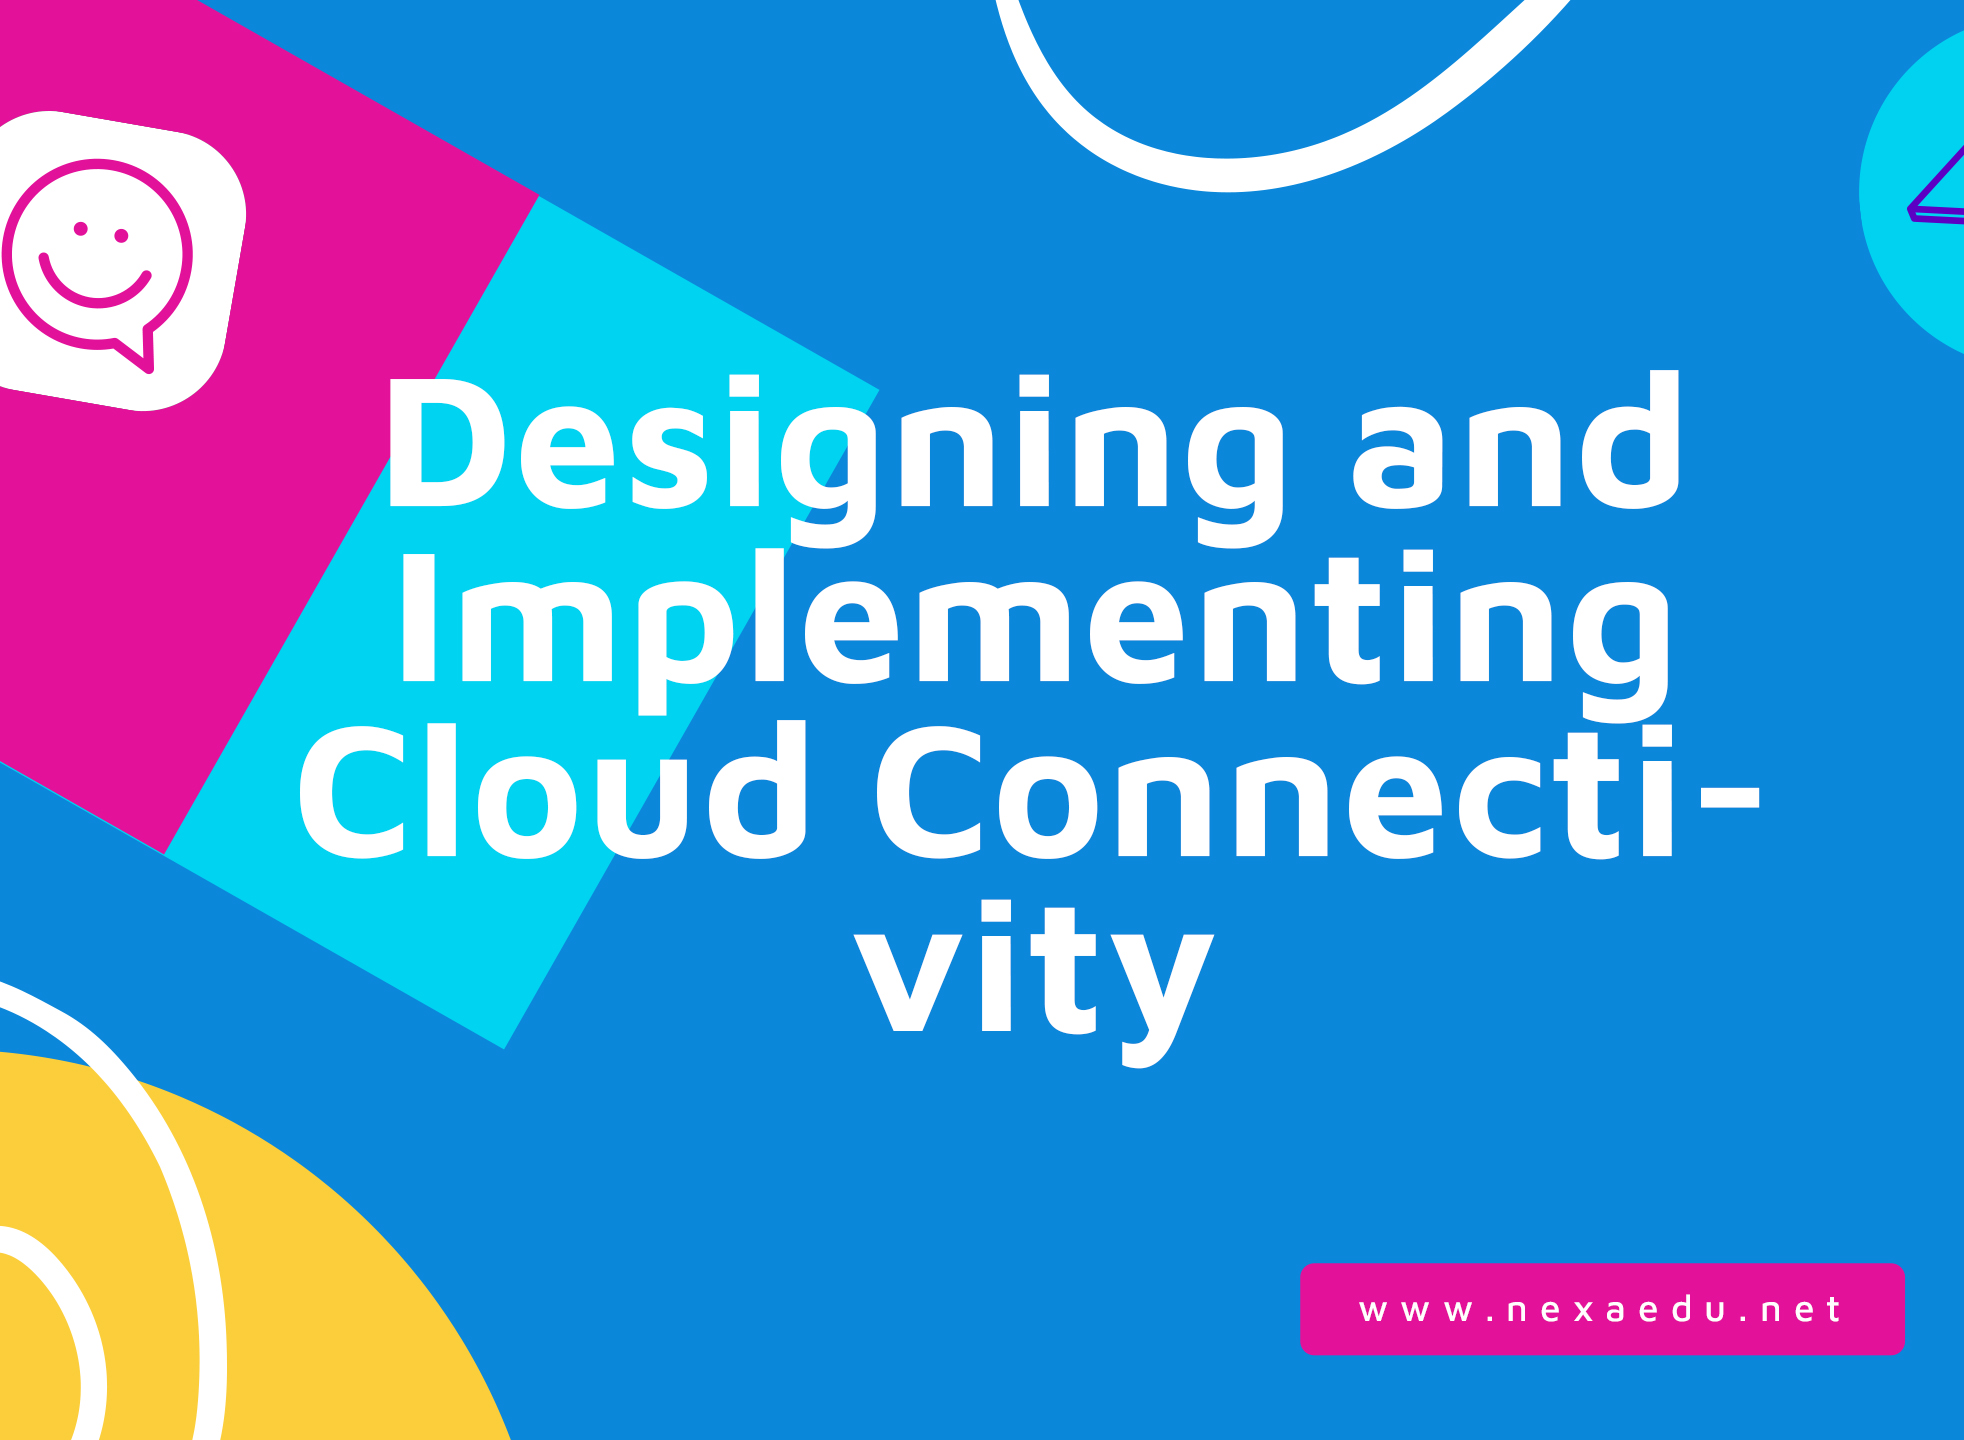 Designing and Implementing Cloud Connectivity